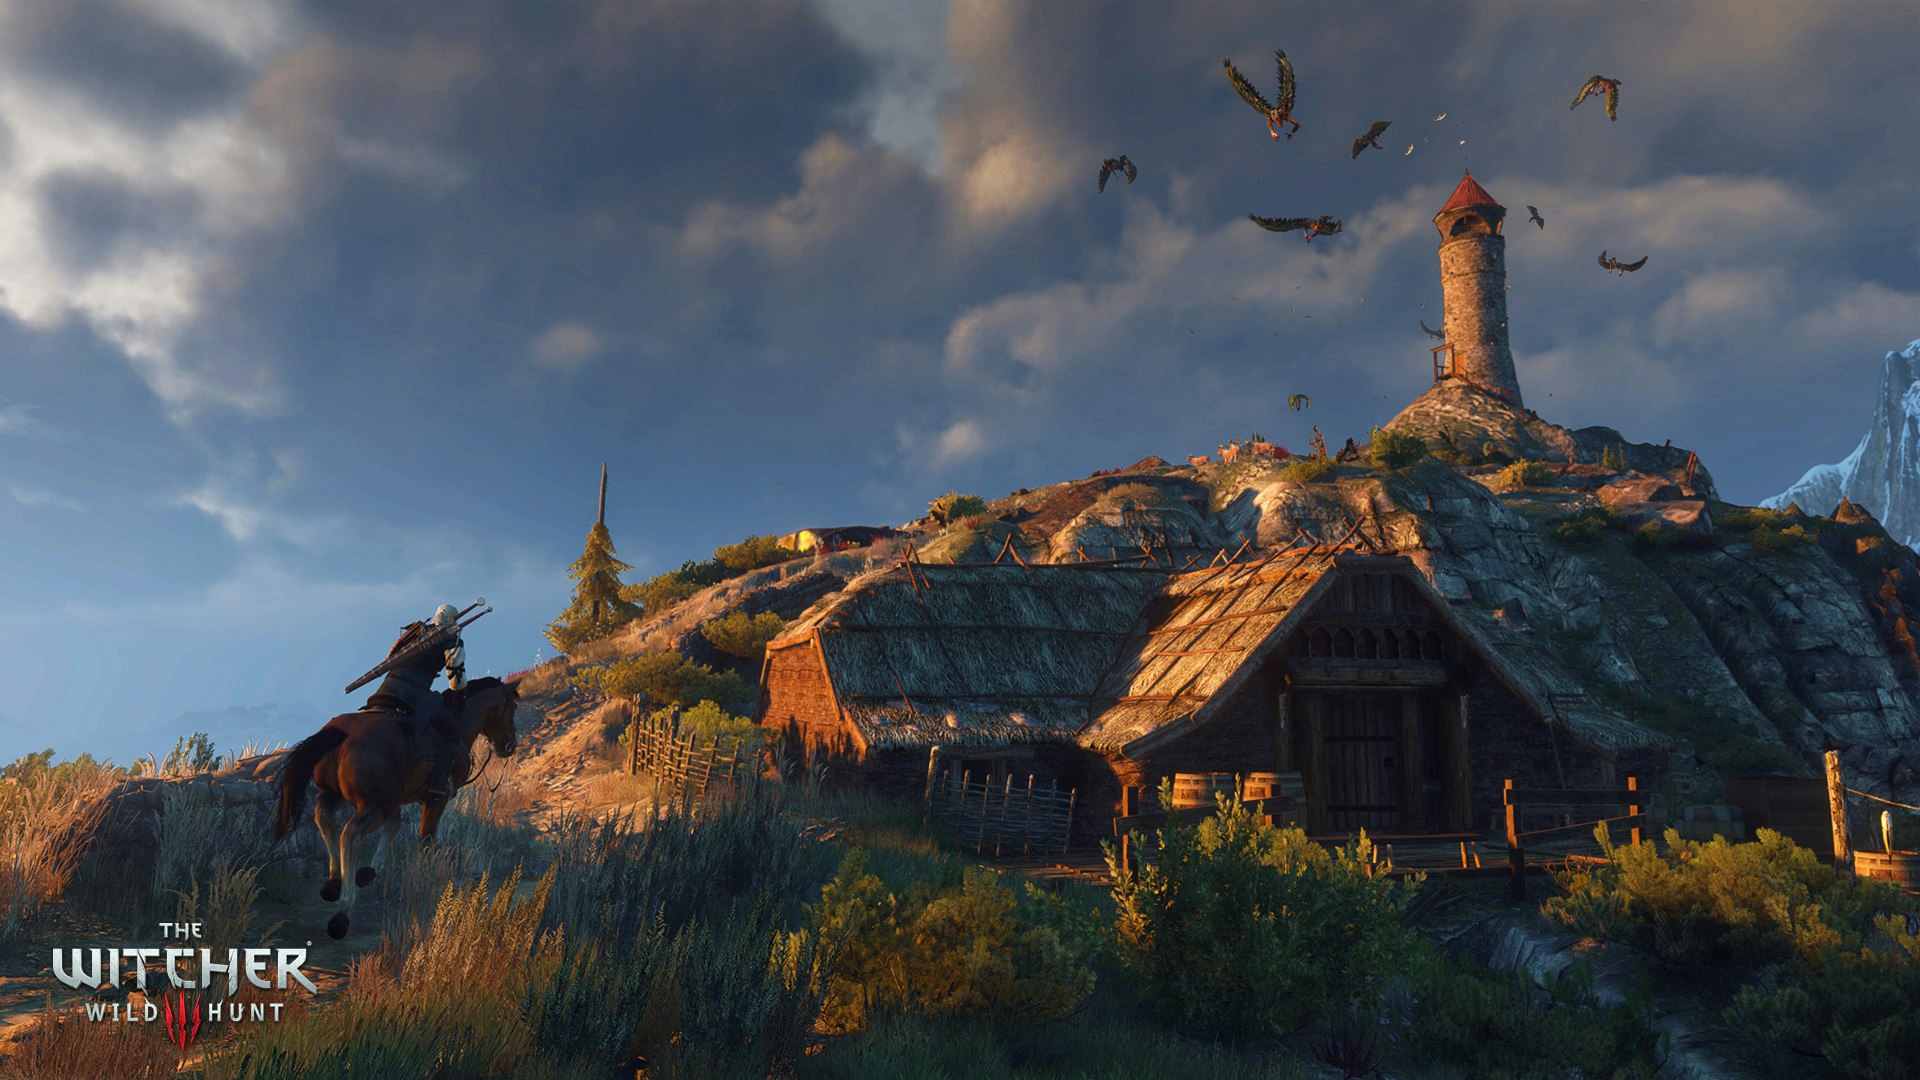 Geralt rides his horse up a hill towards a lone lighthouse in a screenshot from the game The Witcher 3: Wild Hunt